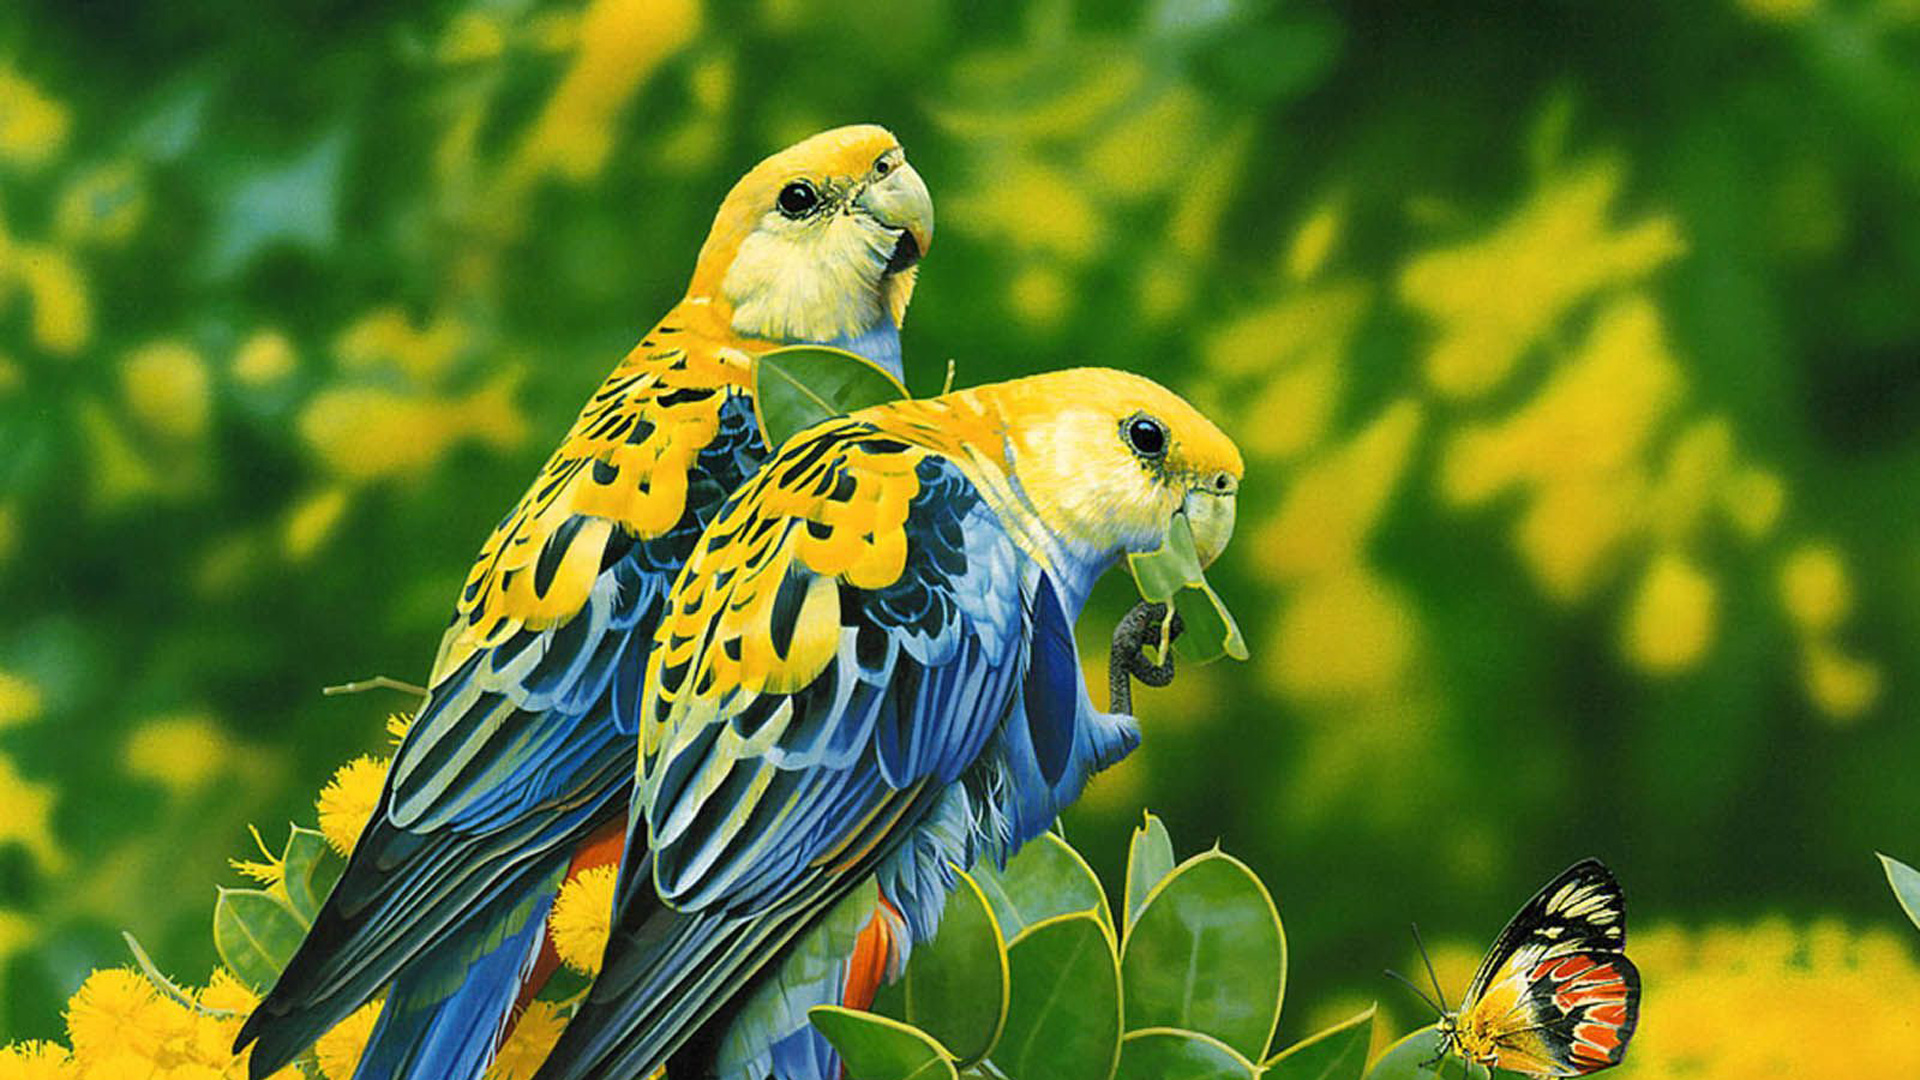 Blue Yellow Birds Are Sitting On Yellow Flowers Green Leaves Branches HD Birds